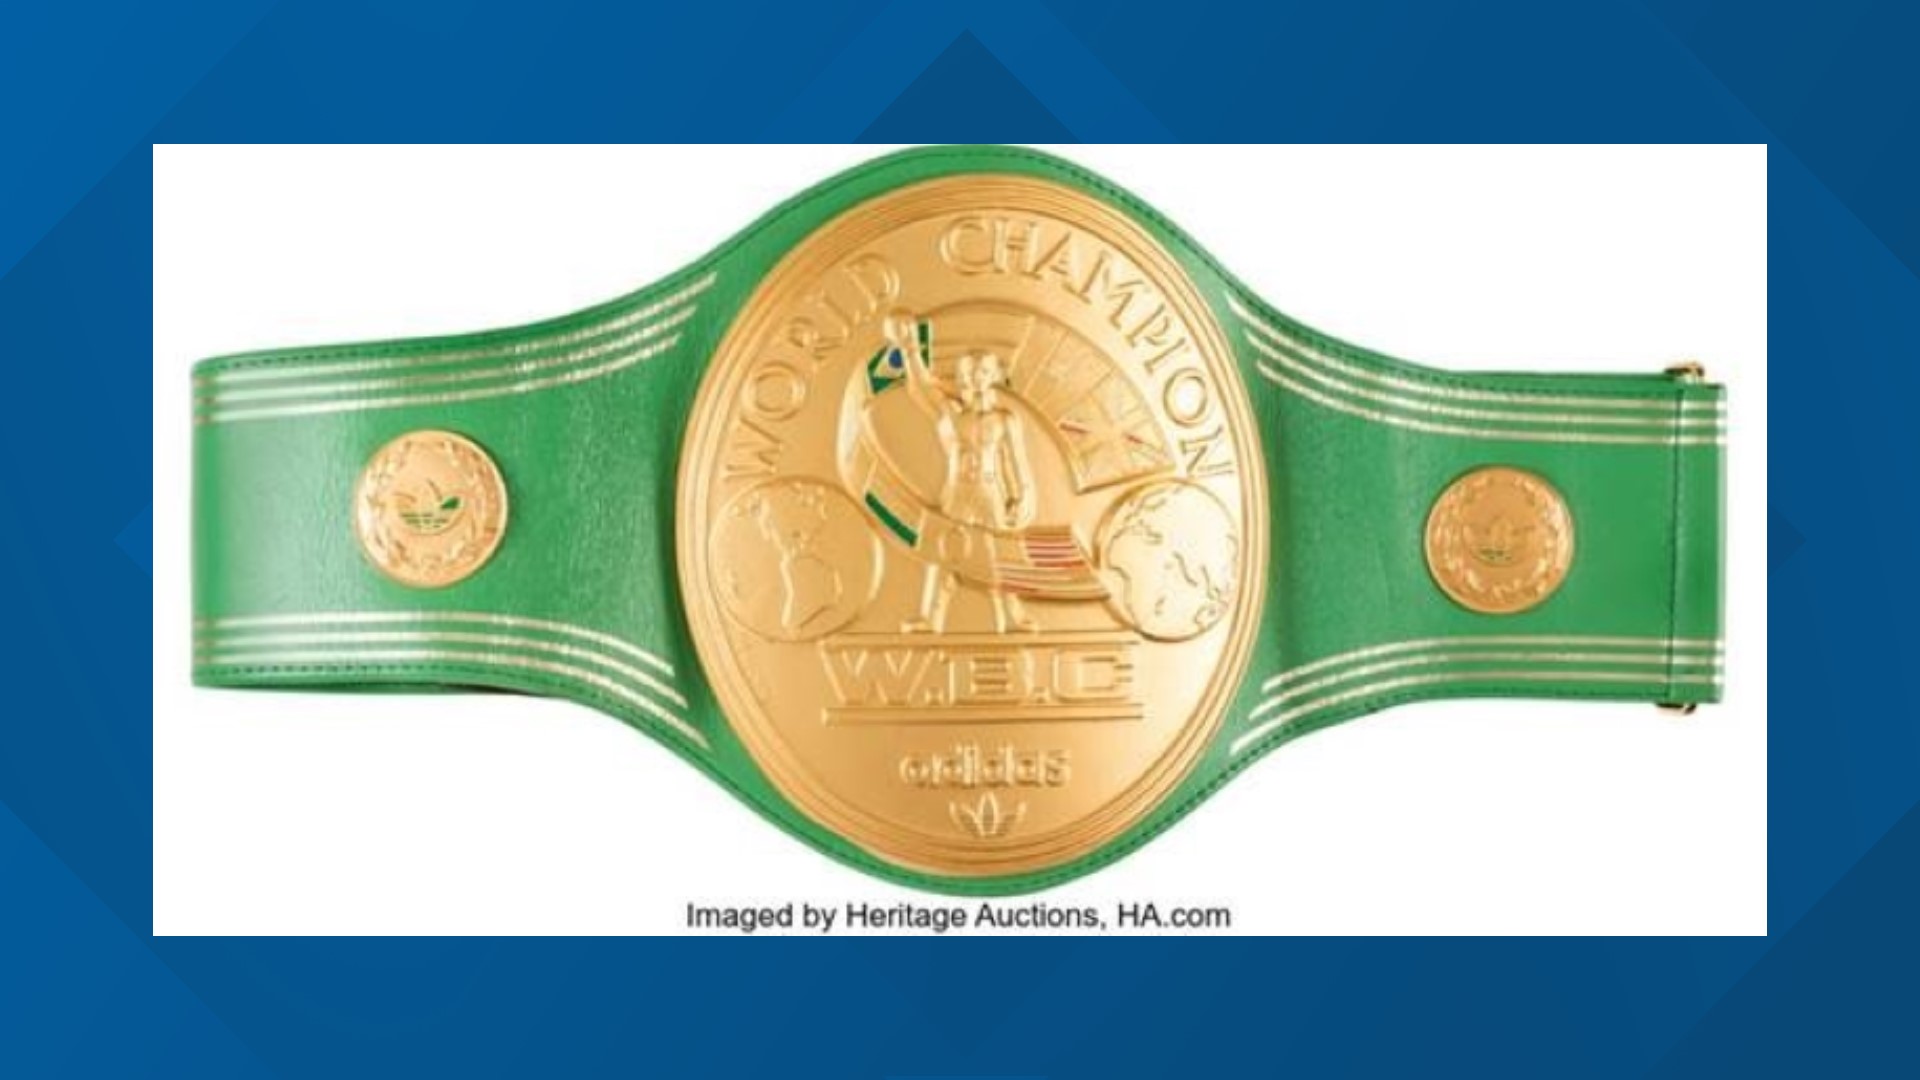 The winner of the heated competition for the belt was Indianapolis Colts owner Jim Irsay, according to Heritage Auctions in Dallas.